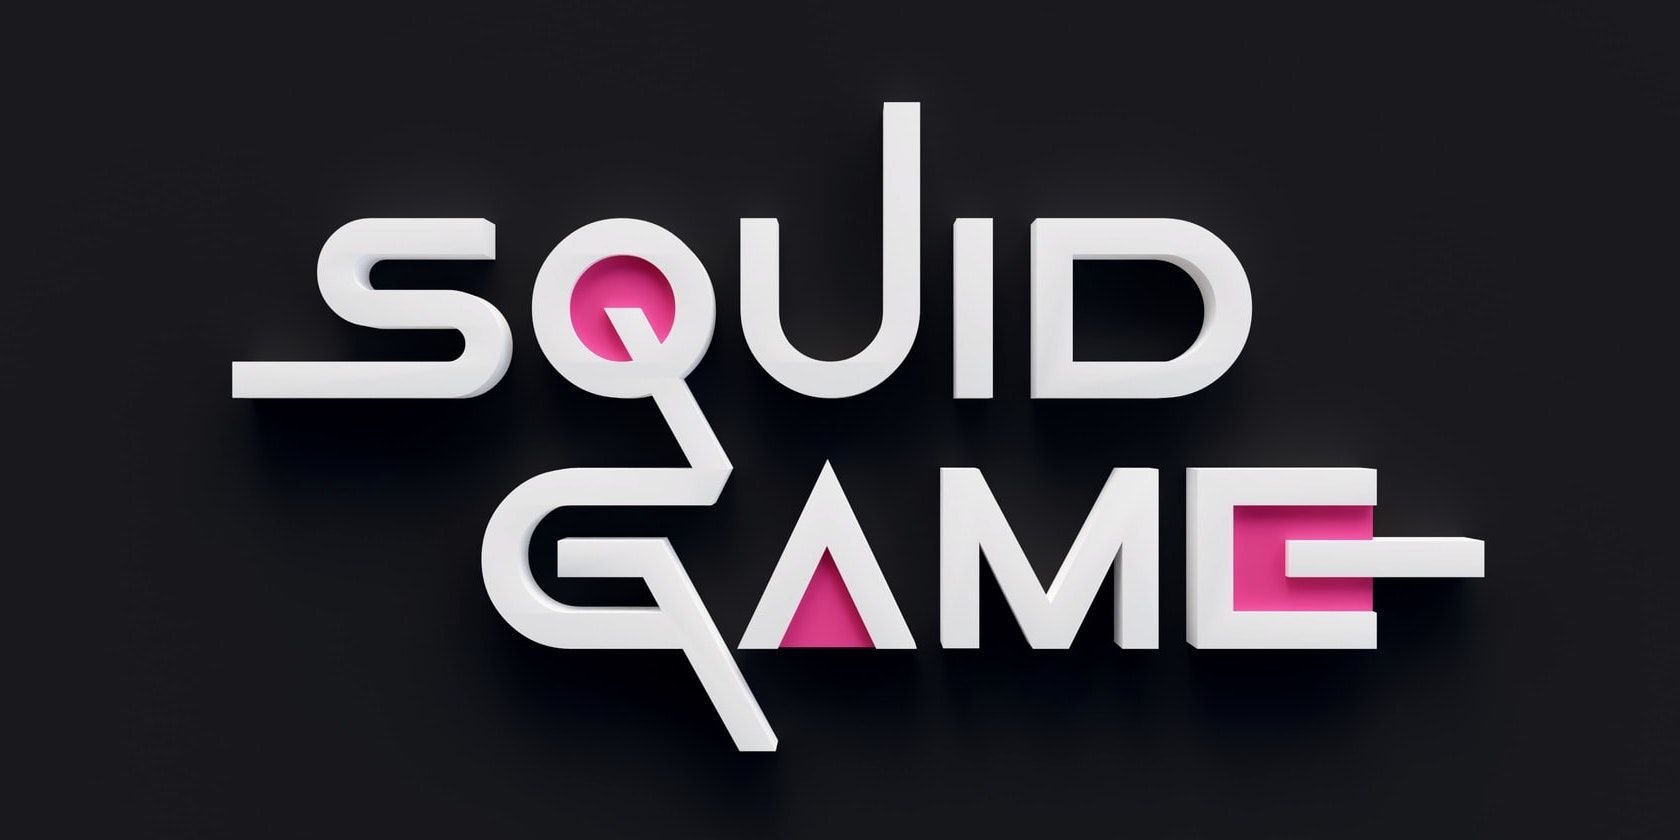 The title Squid Game written in white with neon pink accents, on a black background 